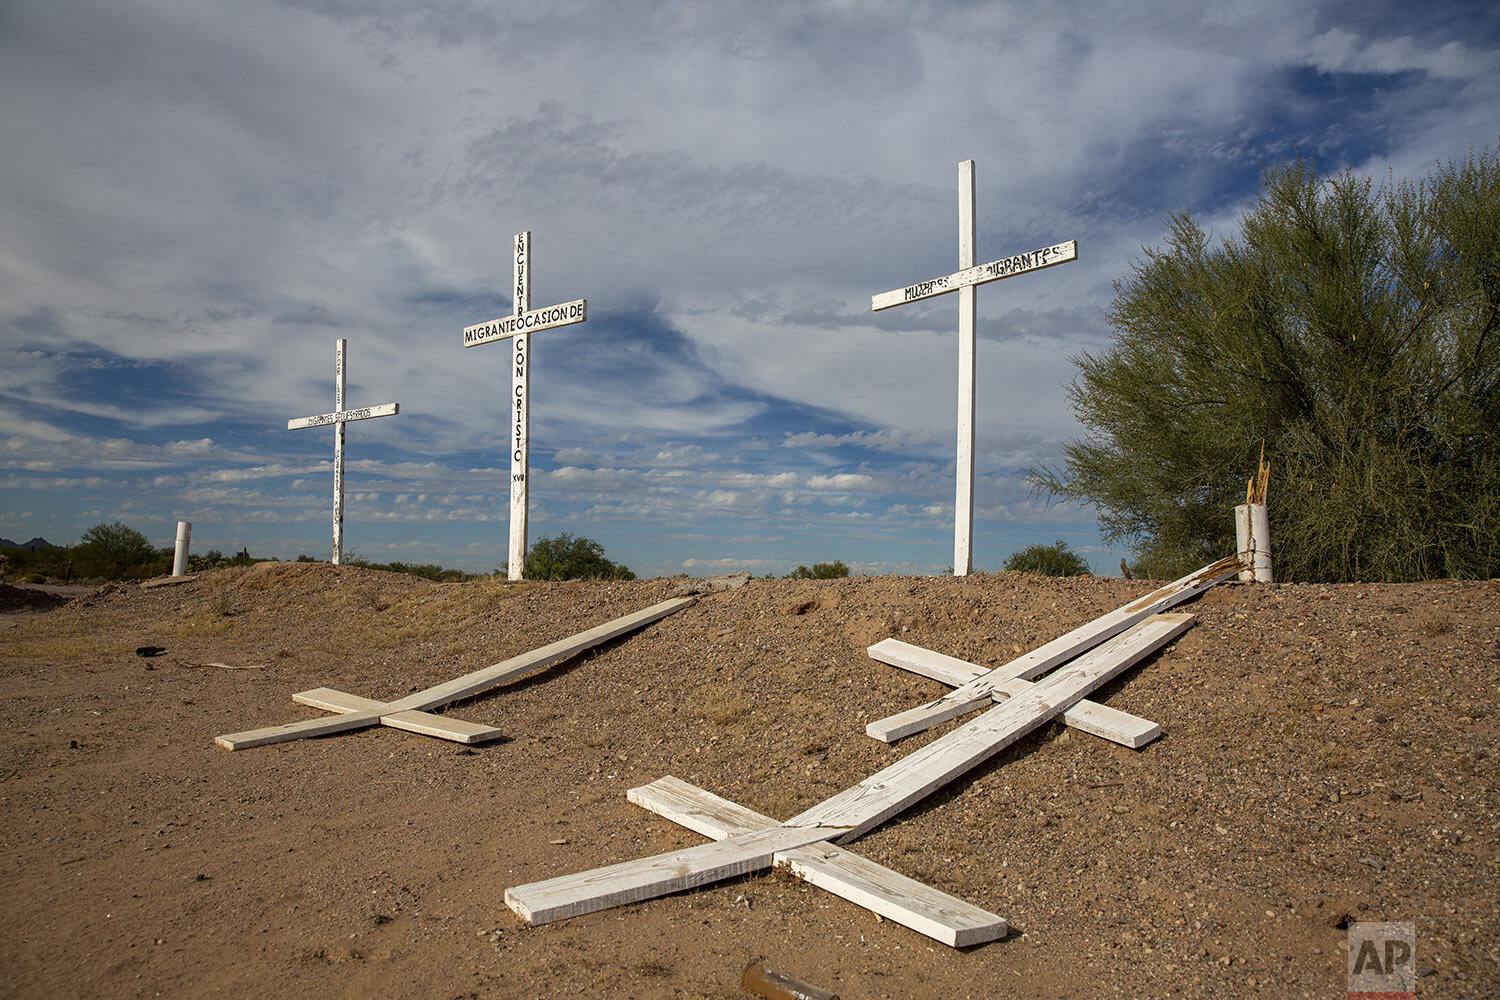  In this Nov. 2, 2019 photo, a memorial for dead migrants lies partially destroyed along the road between Altar and Sasabe, Sonora state, Mexico. (AP Photo/Moises Castillo) 